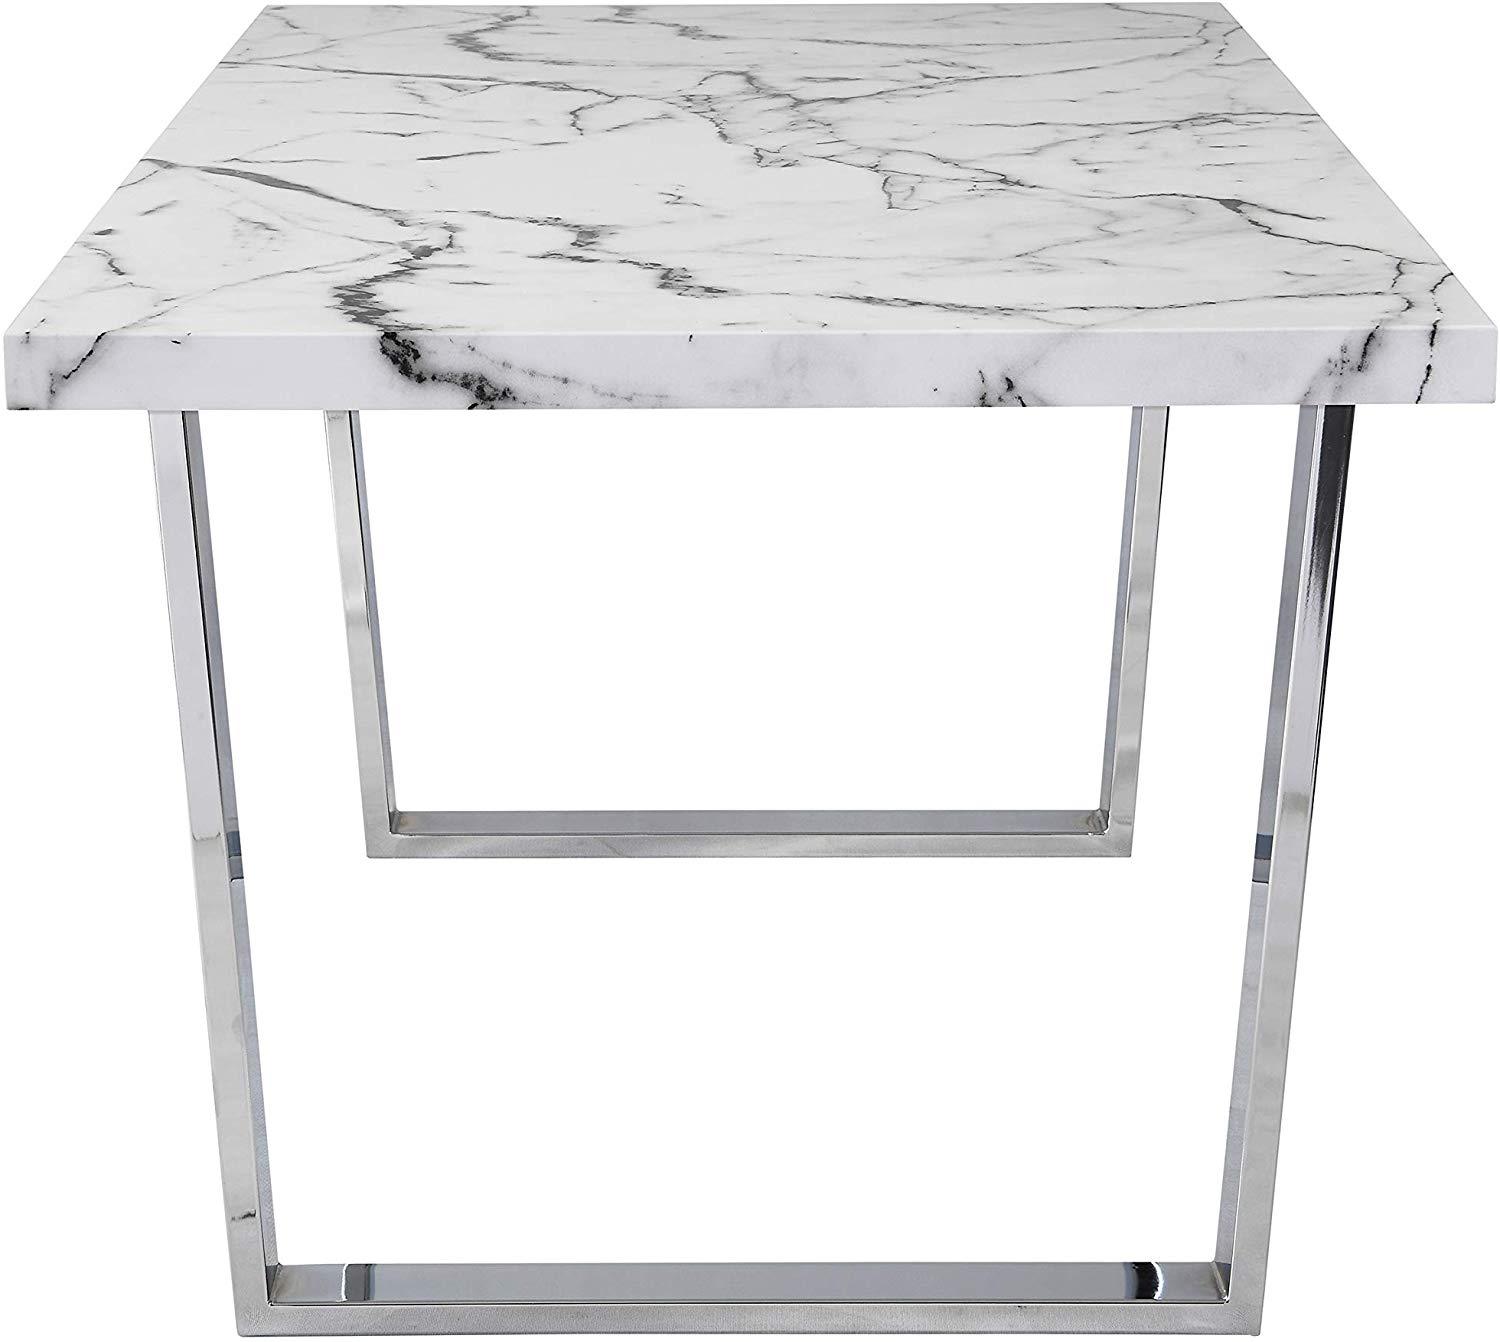 BIASCA 6-Seater High Gloss Marble Effect Dining Table with Silver Chrome Legs White